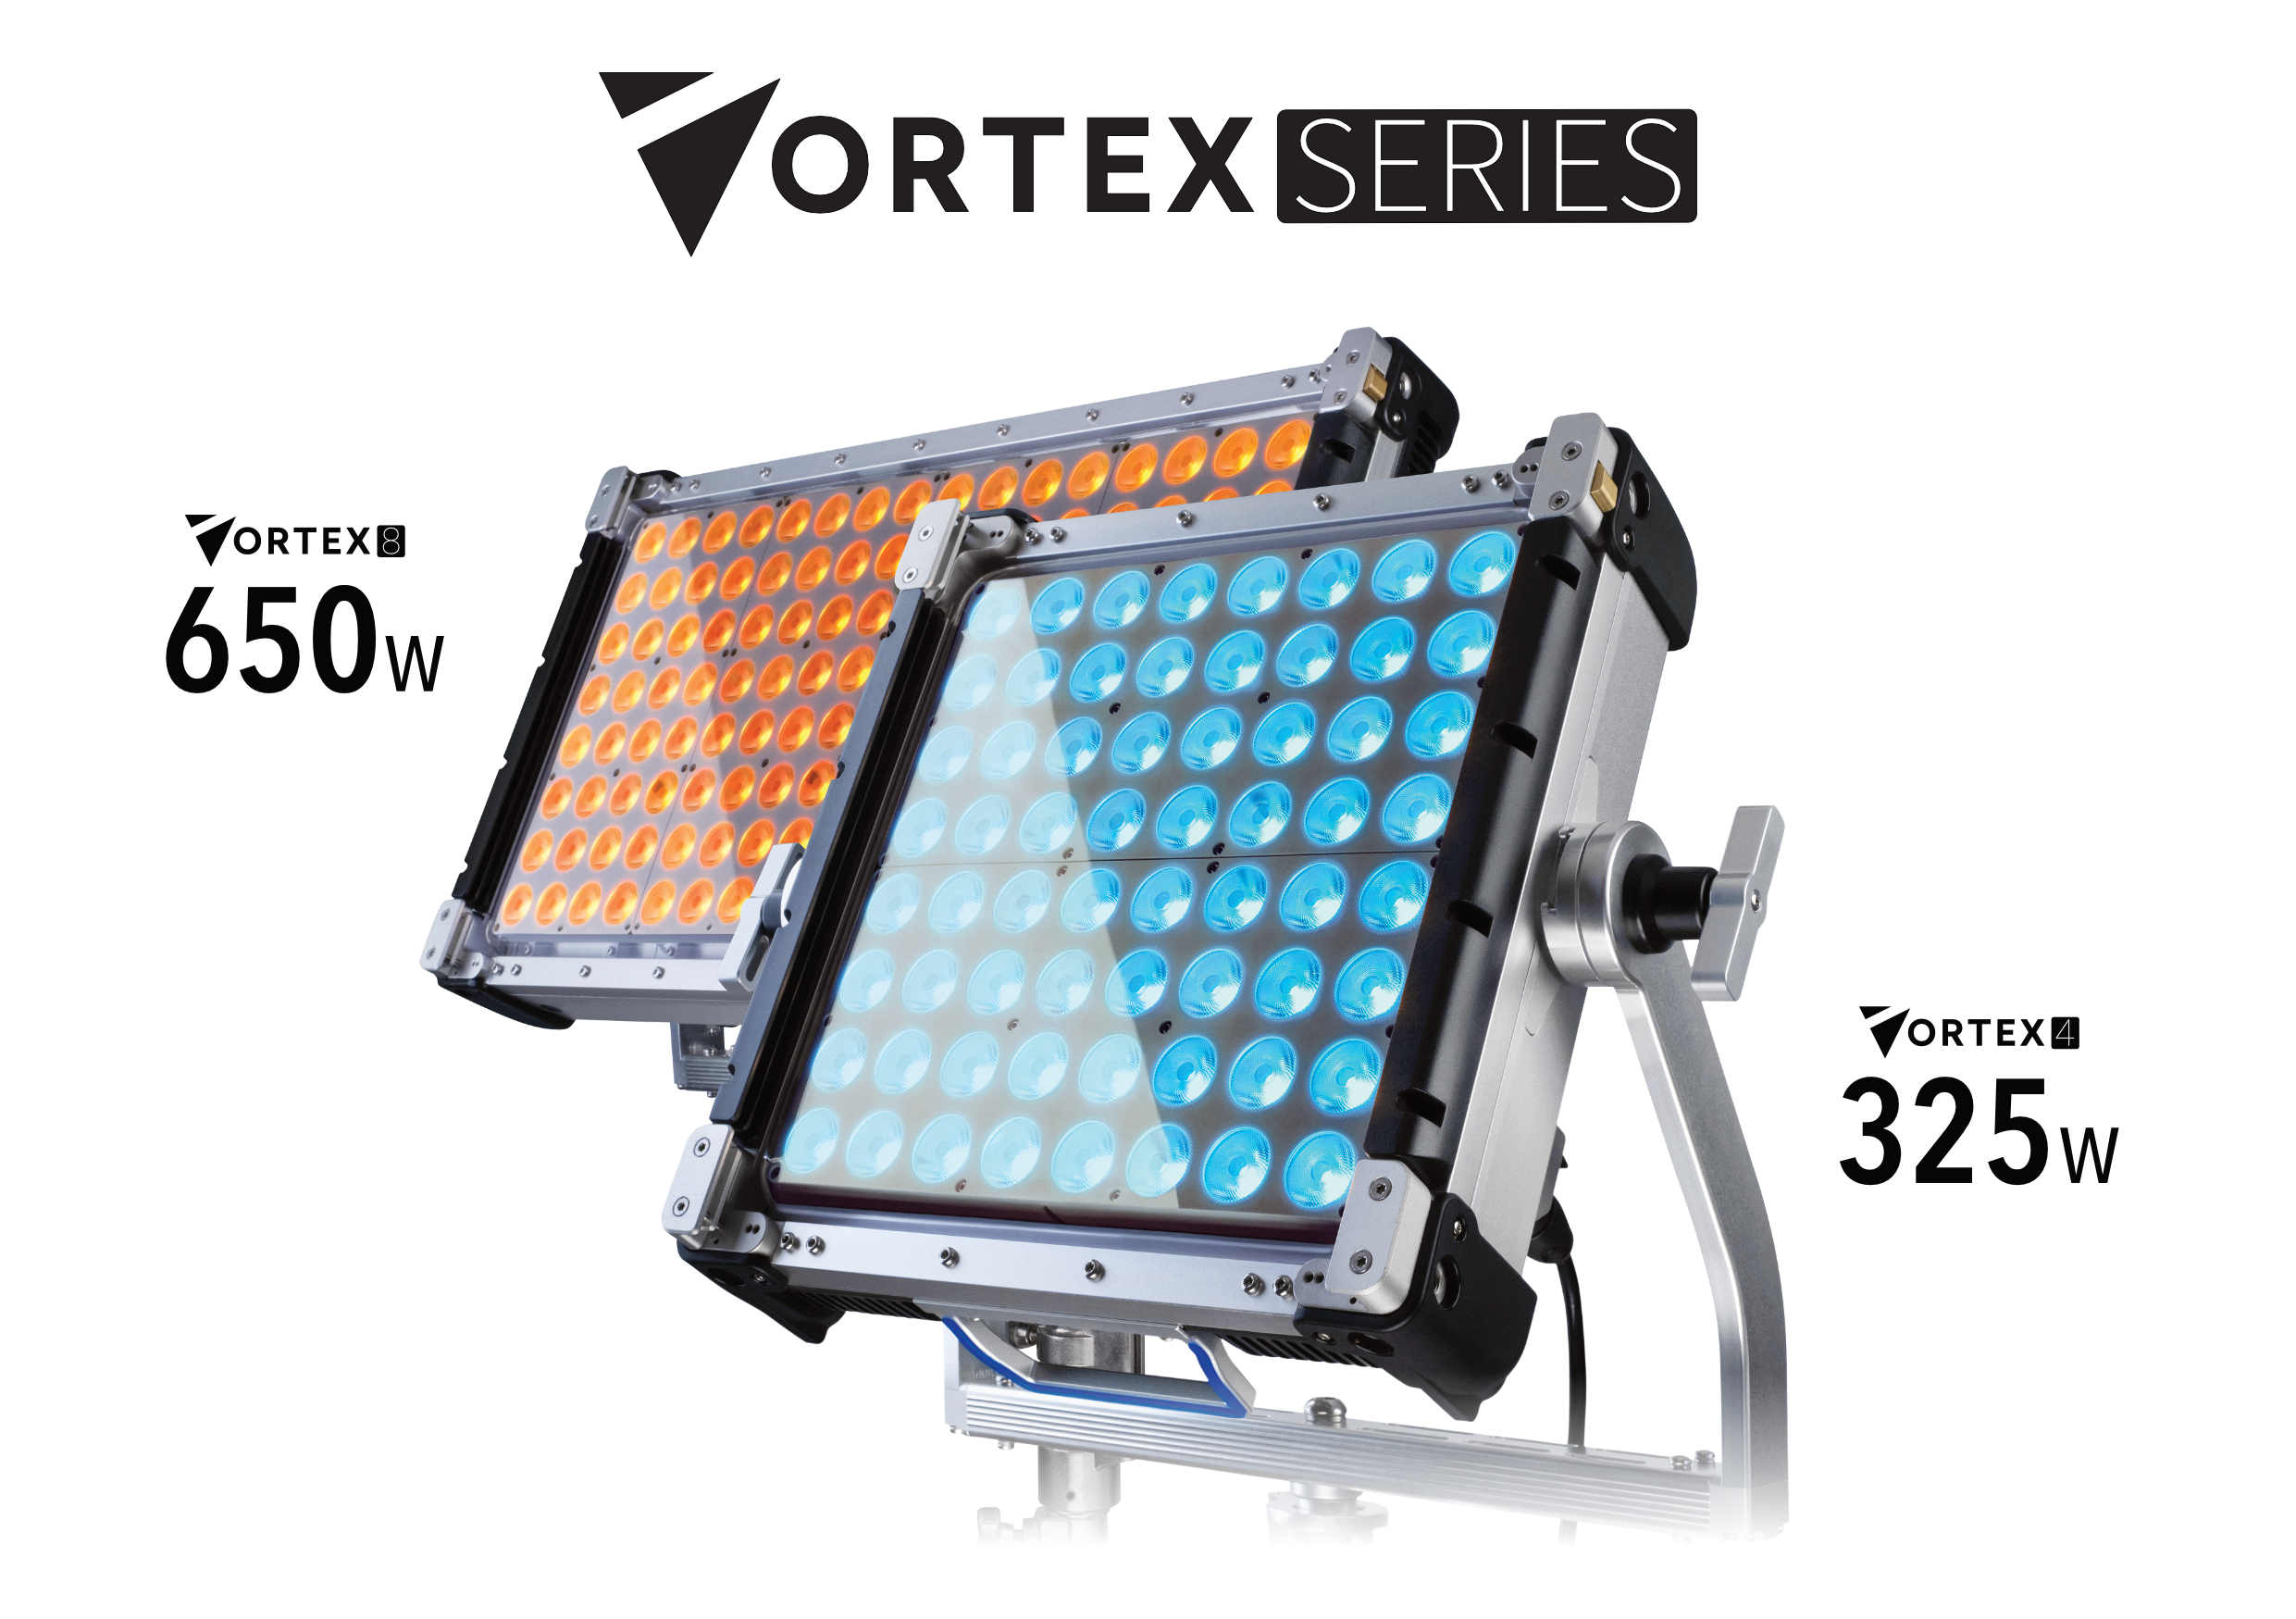 The Vortex4 affords customers a seamless integration with the Vortex8 for easily expanded lighting configurations.